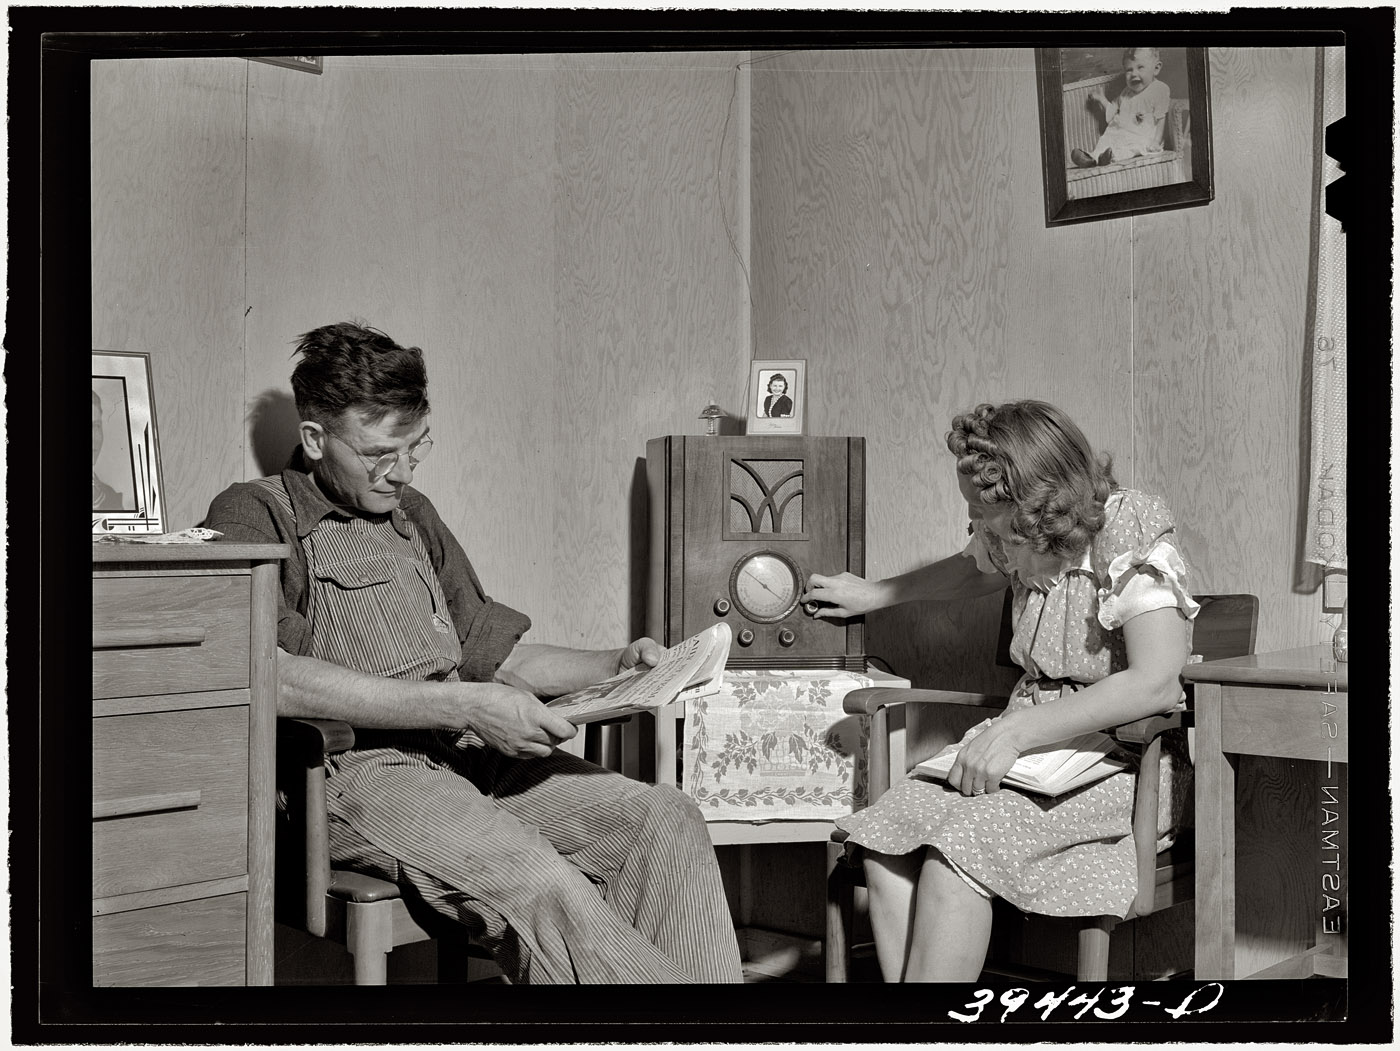 June 1941. Family at the "USDA farm family labor camp" in Caldwell, Idaho. View full size. Medium format safety negative by Russell Lee for the FSA.